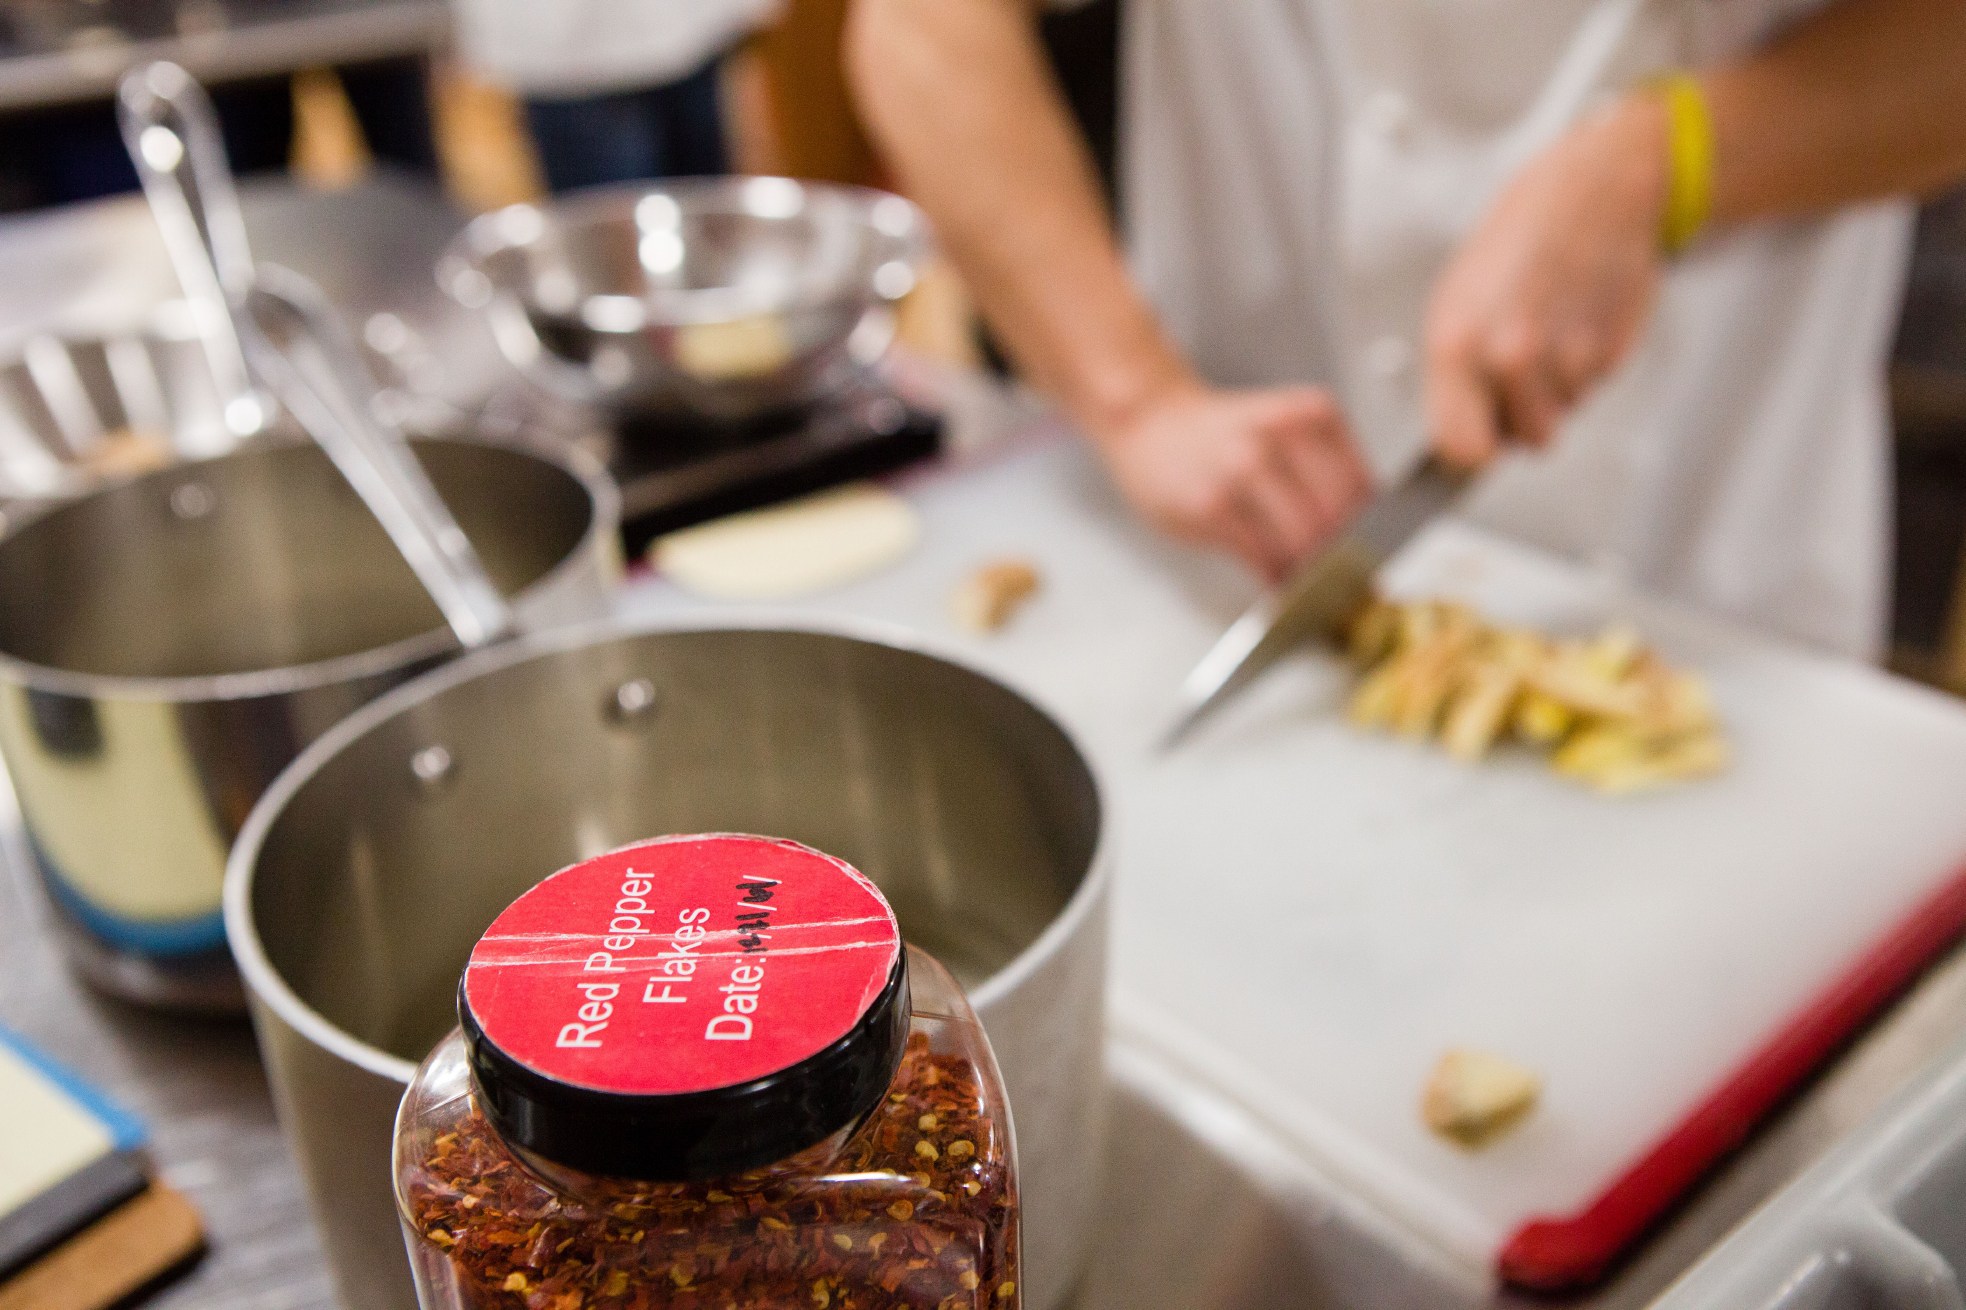 Pepper flakes sit in the foreground ready to use as associate editor Tim Chin slices ginger. The spiciness of ginger dissipates over time so Tim is experimenting with ways to infuse heat back into a dish that relies on the root of this flowering plant.